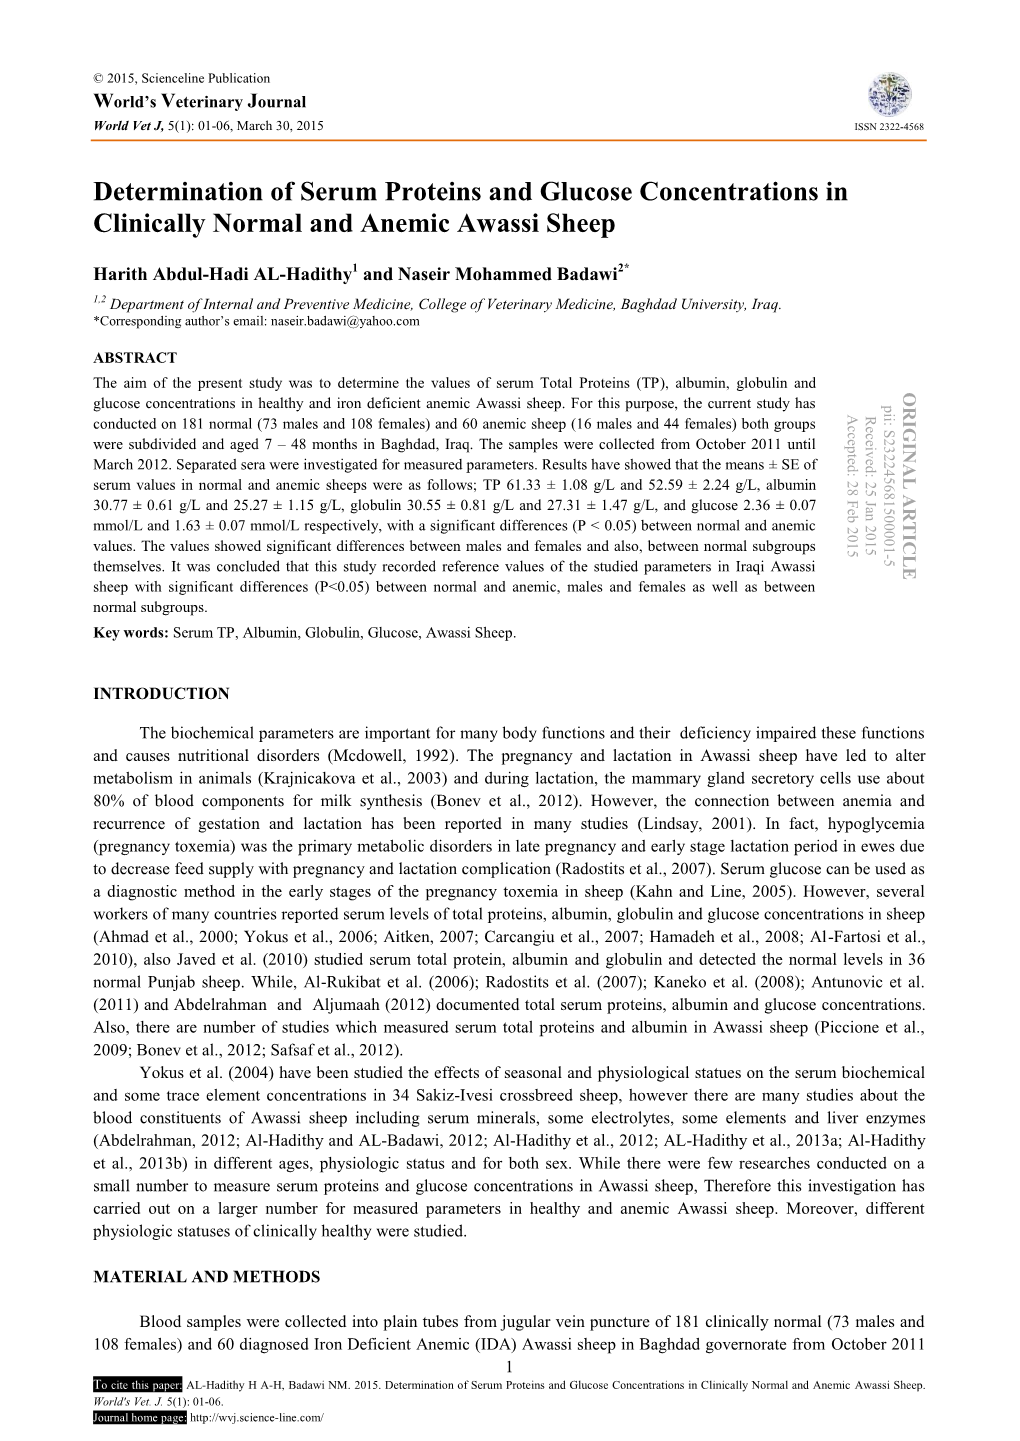 Determination of Serum Proteins and Glucose Concentrations in Clinically Normal and Anemic Awassi Sheep